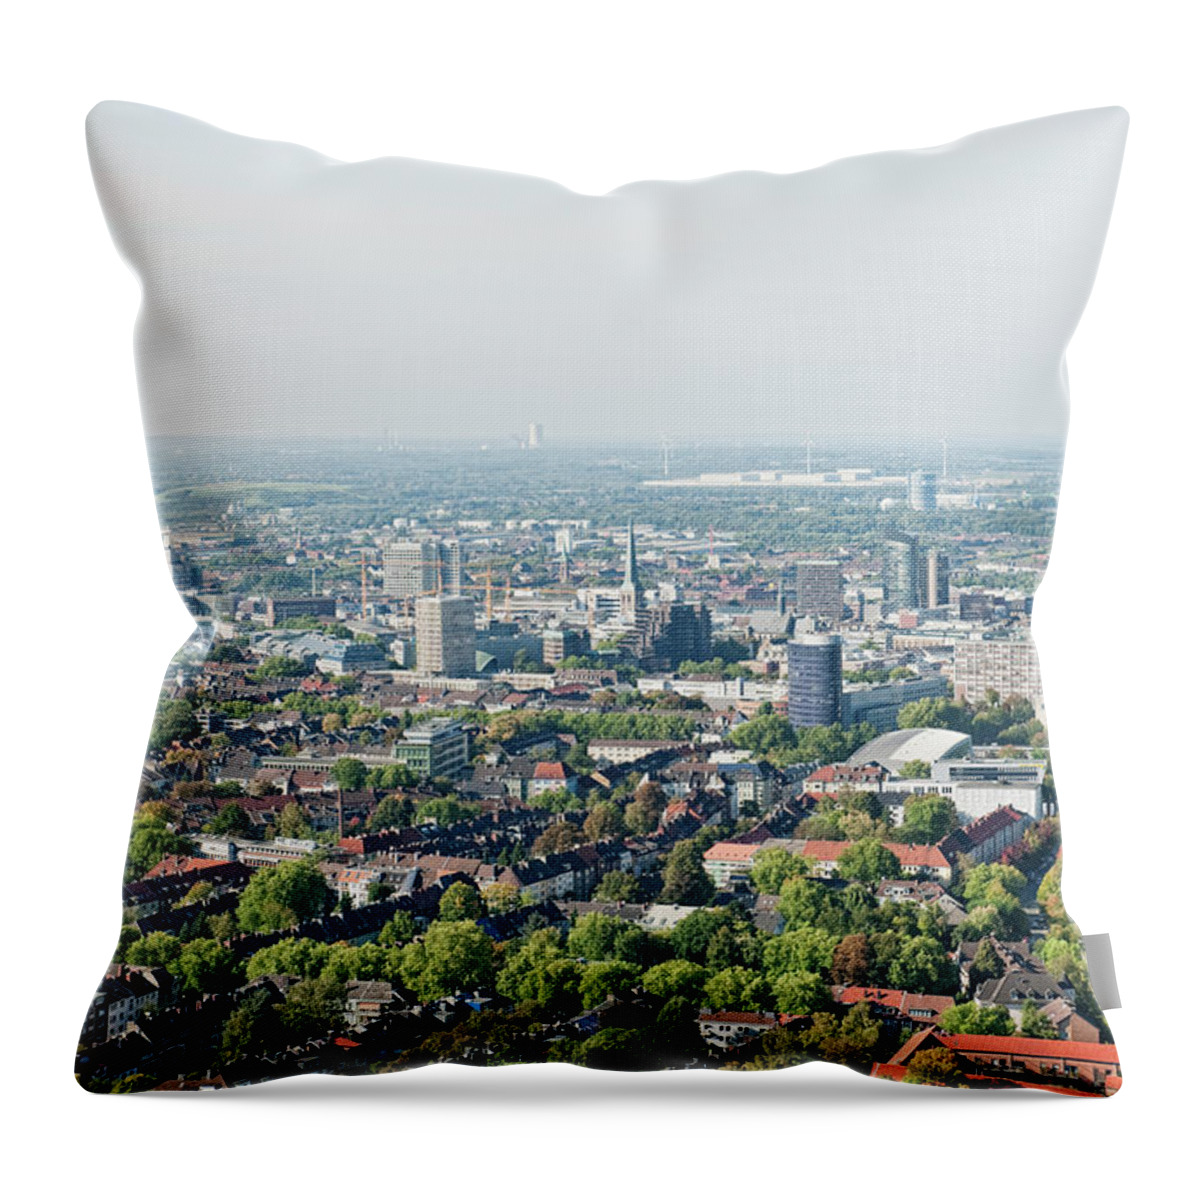 Forecasting Throw Pillow featuring the photograph Aerial View Of City by Johner Images - Laurell, Philip